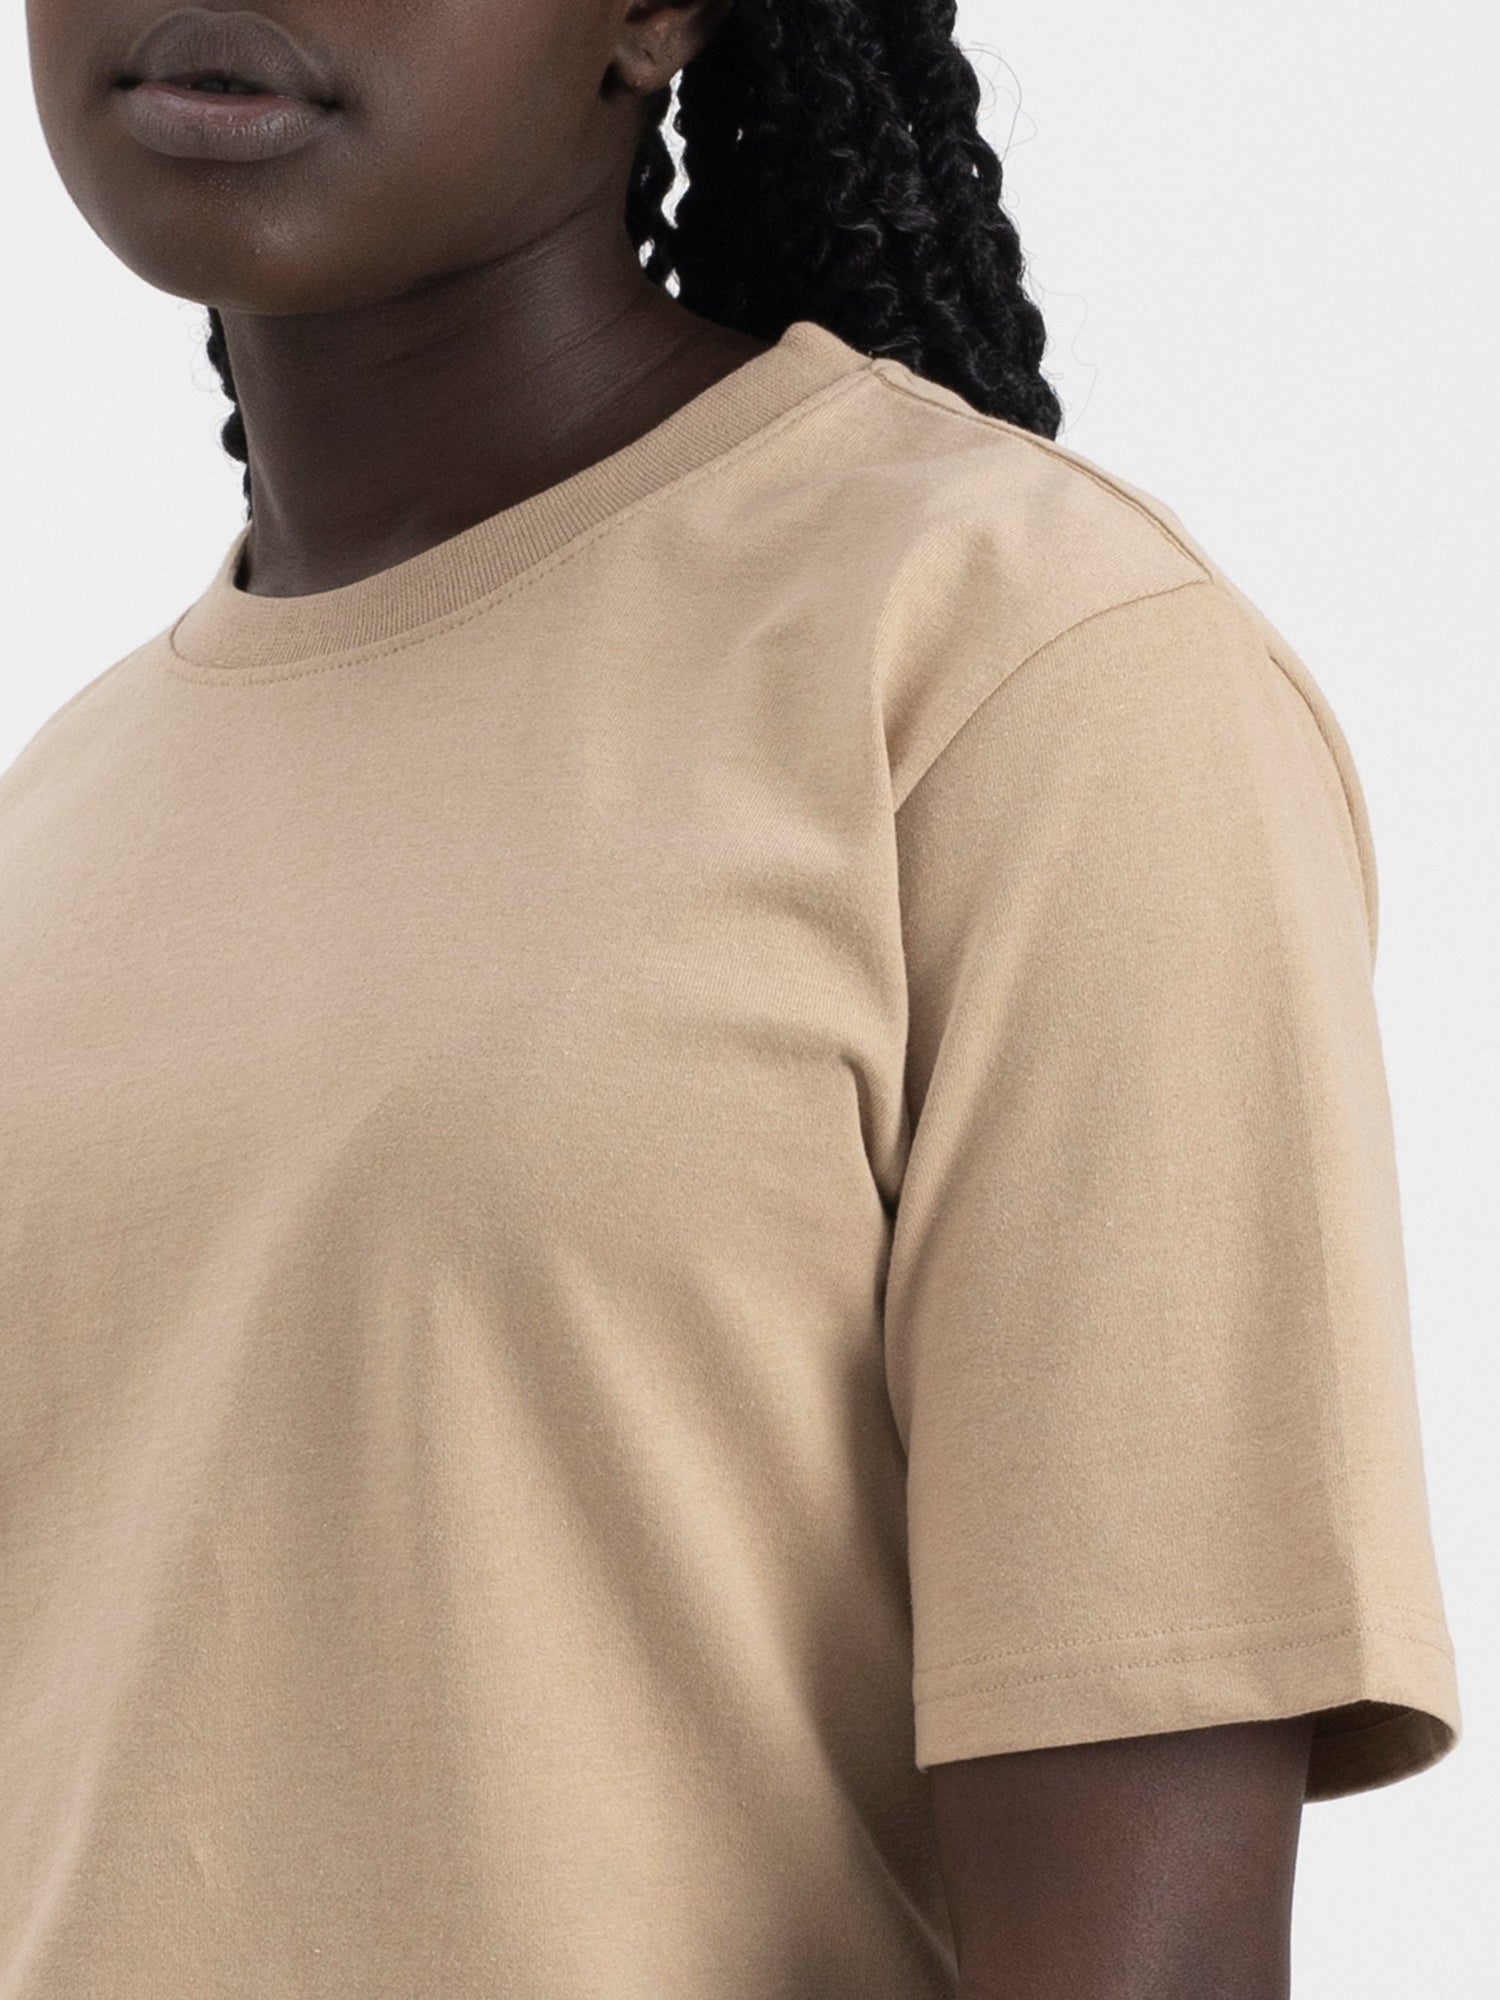 Pure Waste Unisex Loose Fit T-shirt - Recycled Cotton & Recycled Polyester Sand Shirt